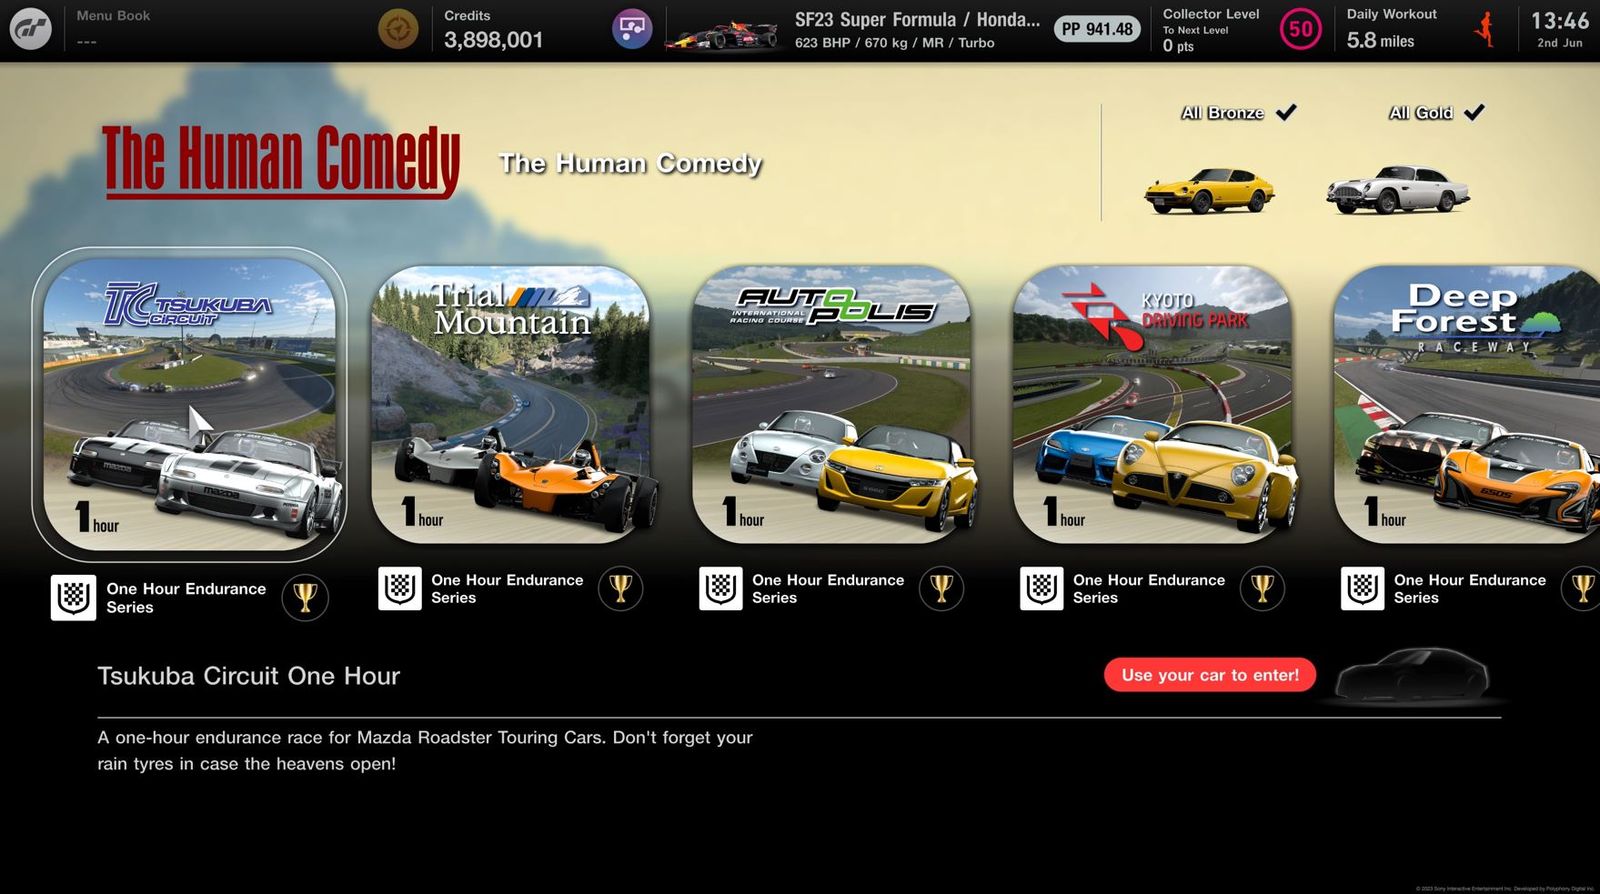 The Human Comedy missions in Gran Turismo 7